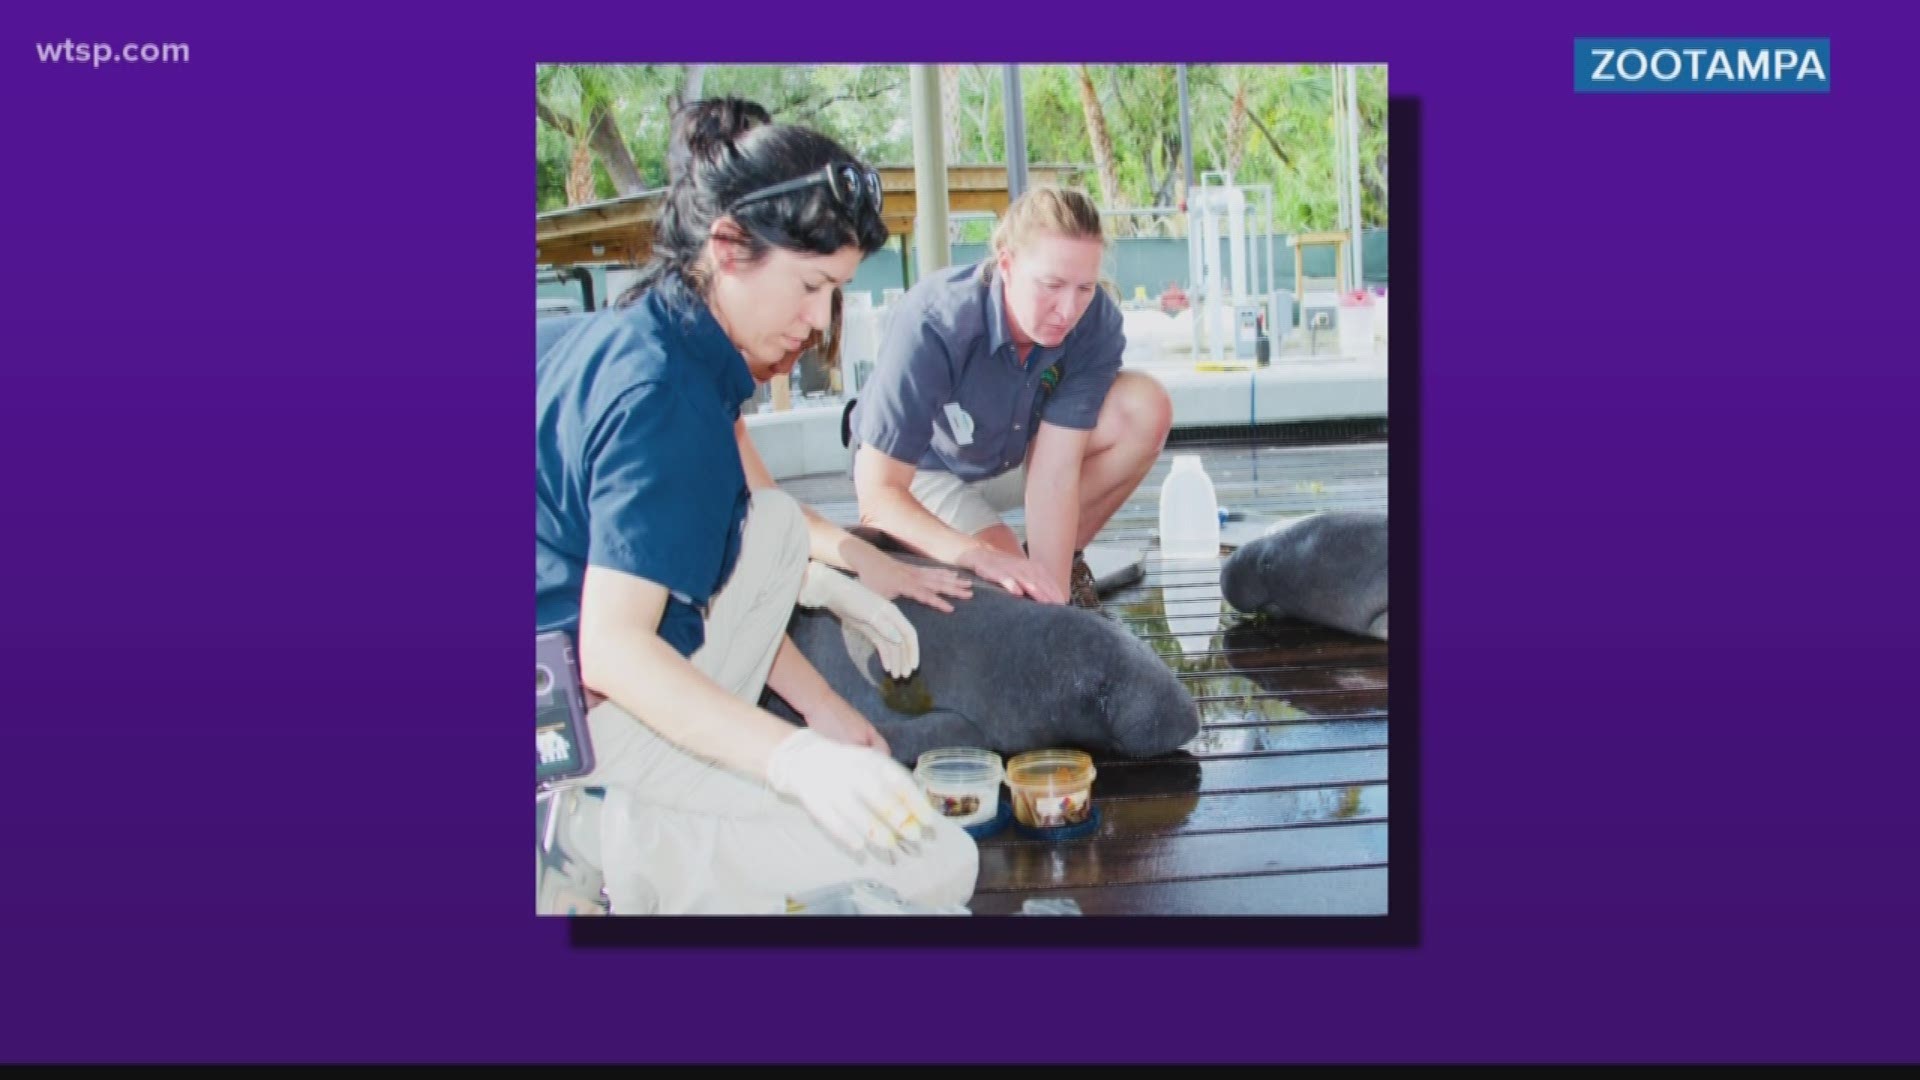 The calves will stay at the Manatee Critical Care Center to get fluids and nutritional support, ZooTampa said in a Facebook post.